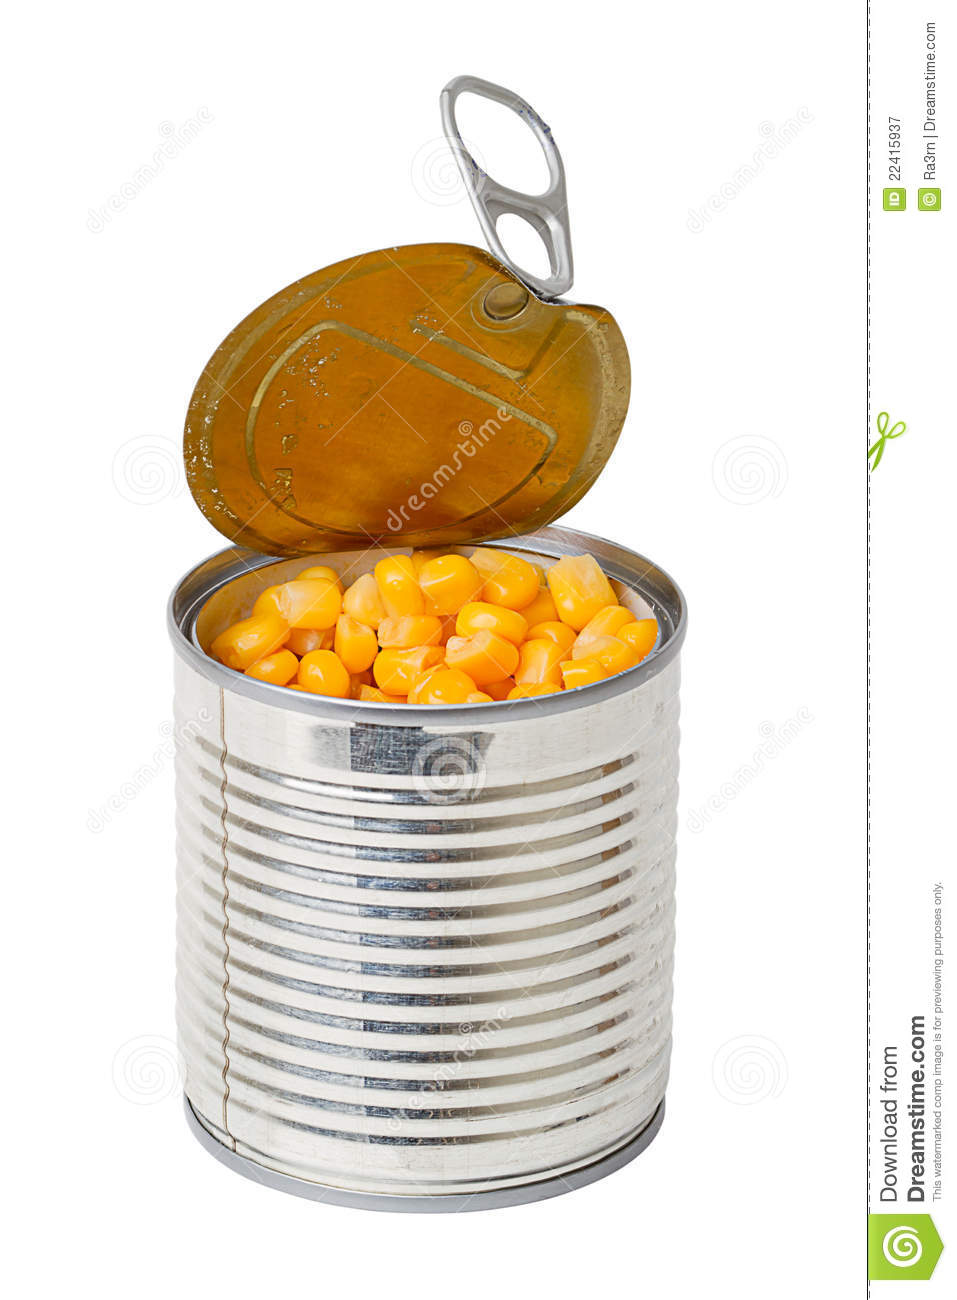 Canned Corn In A Tin  Series Of Canned Foods